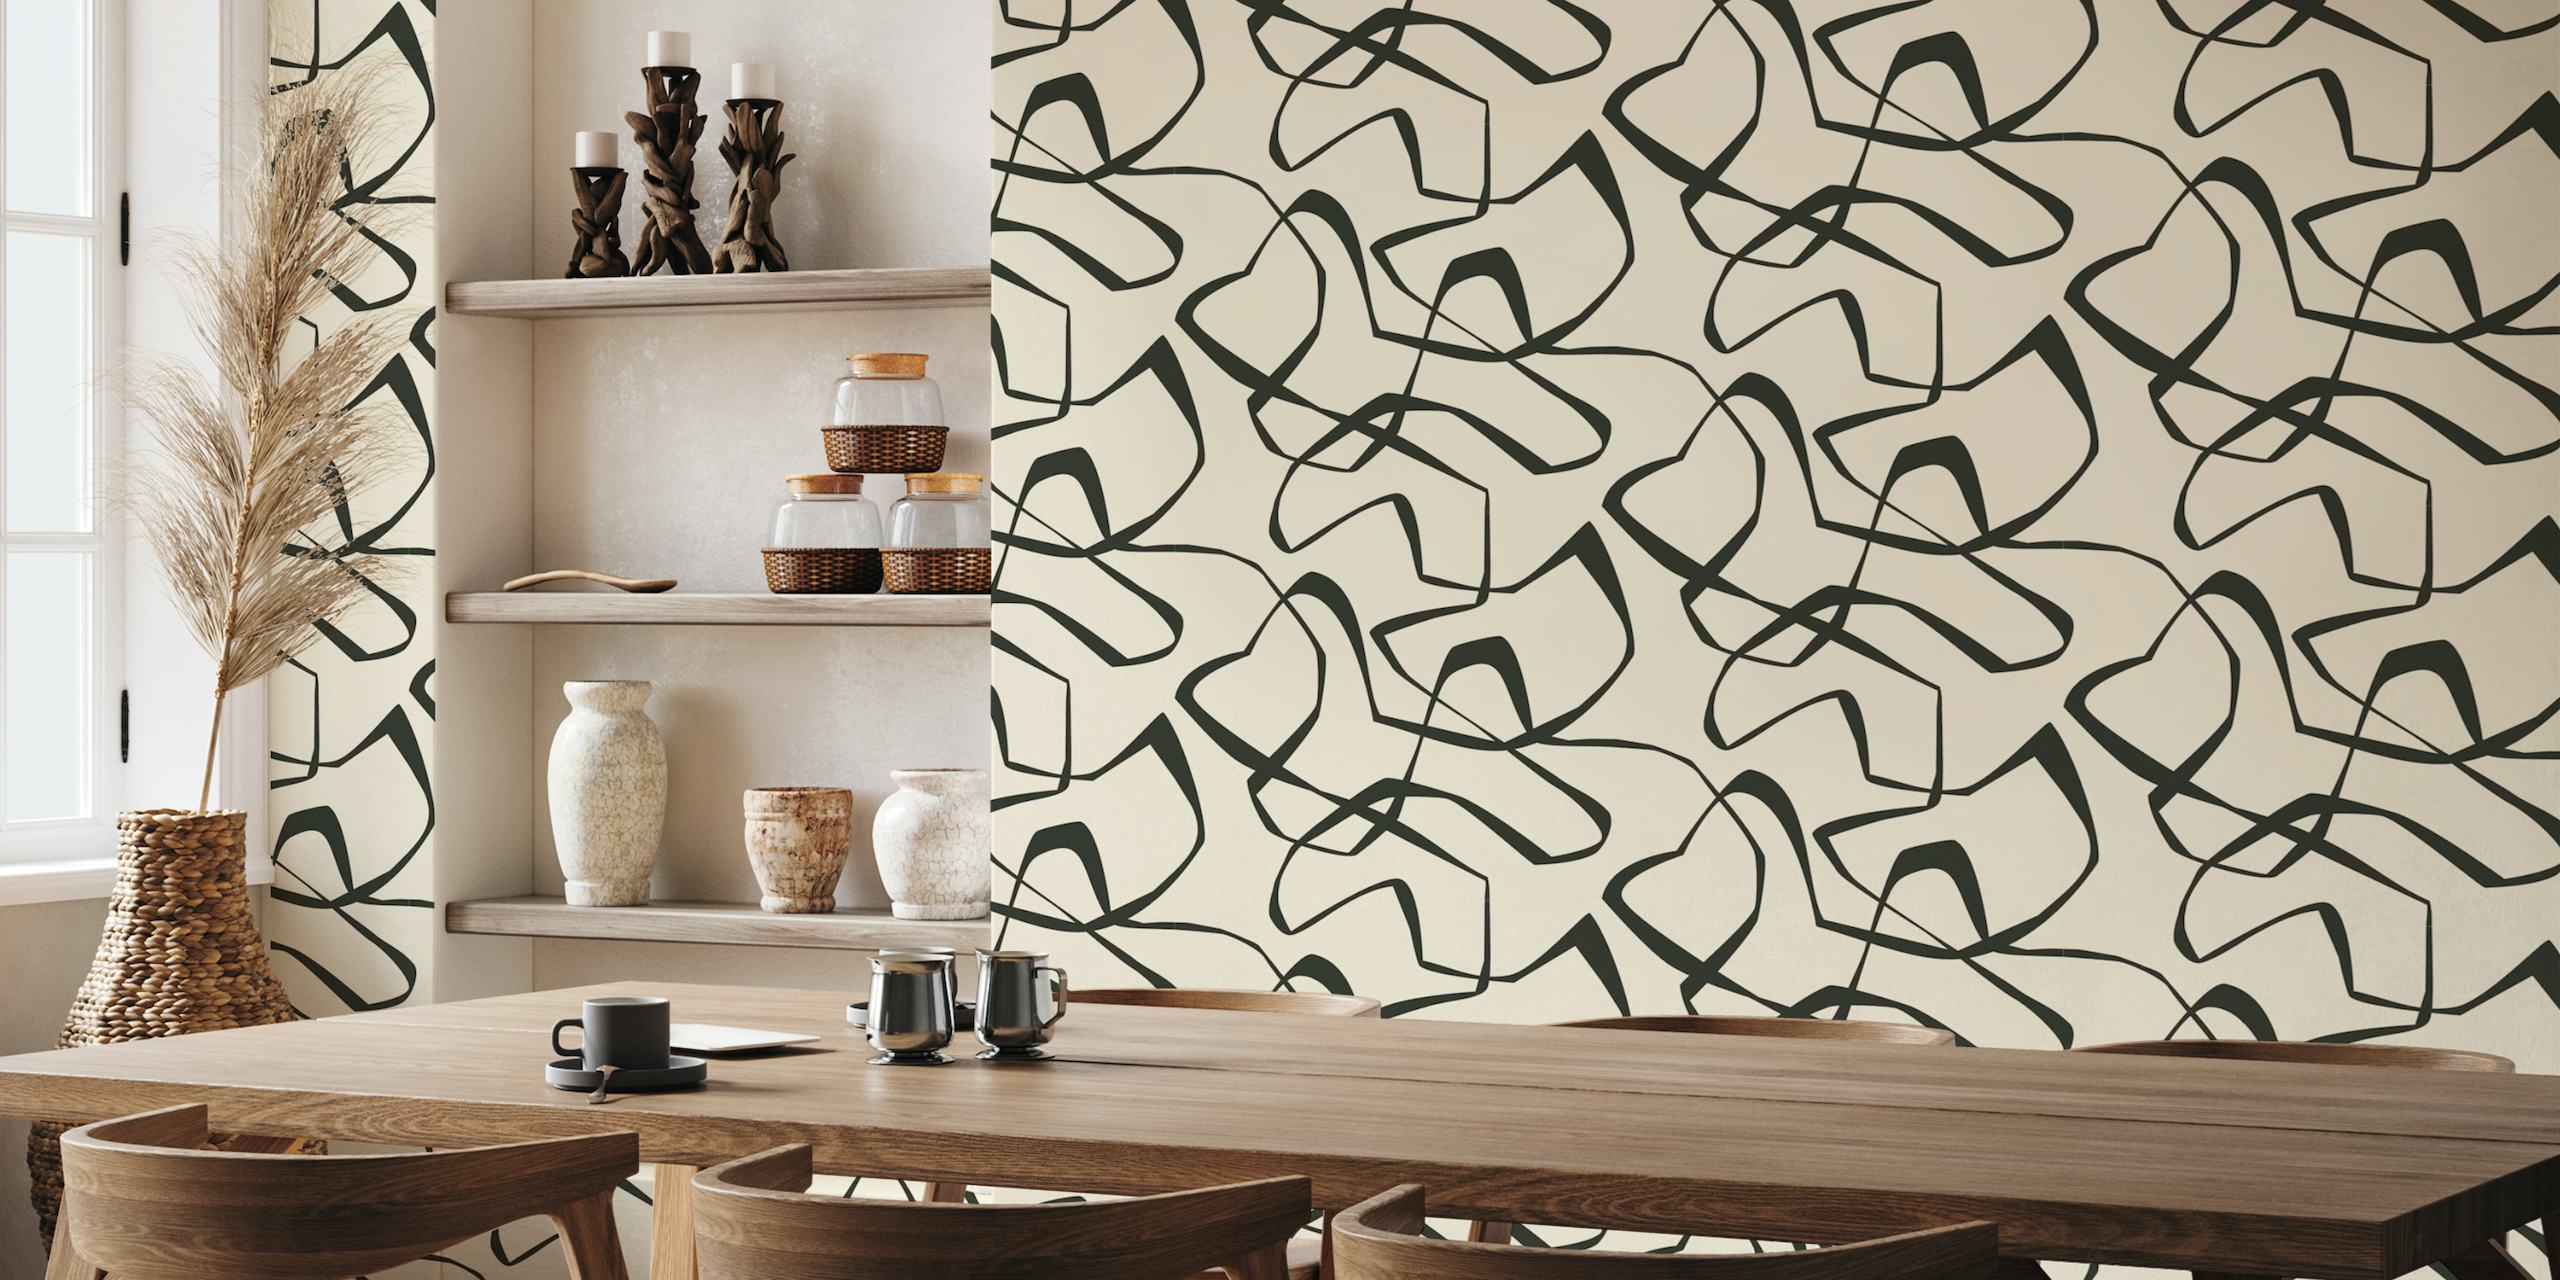 Soft black abstract lines on a cream background in a Japandi style wall mural